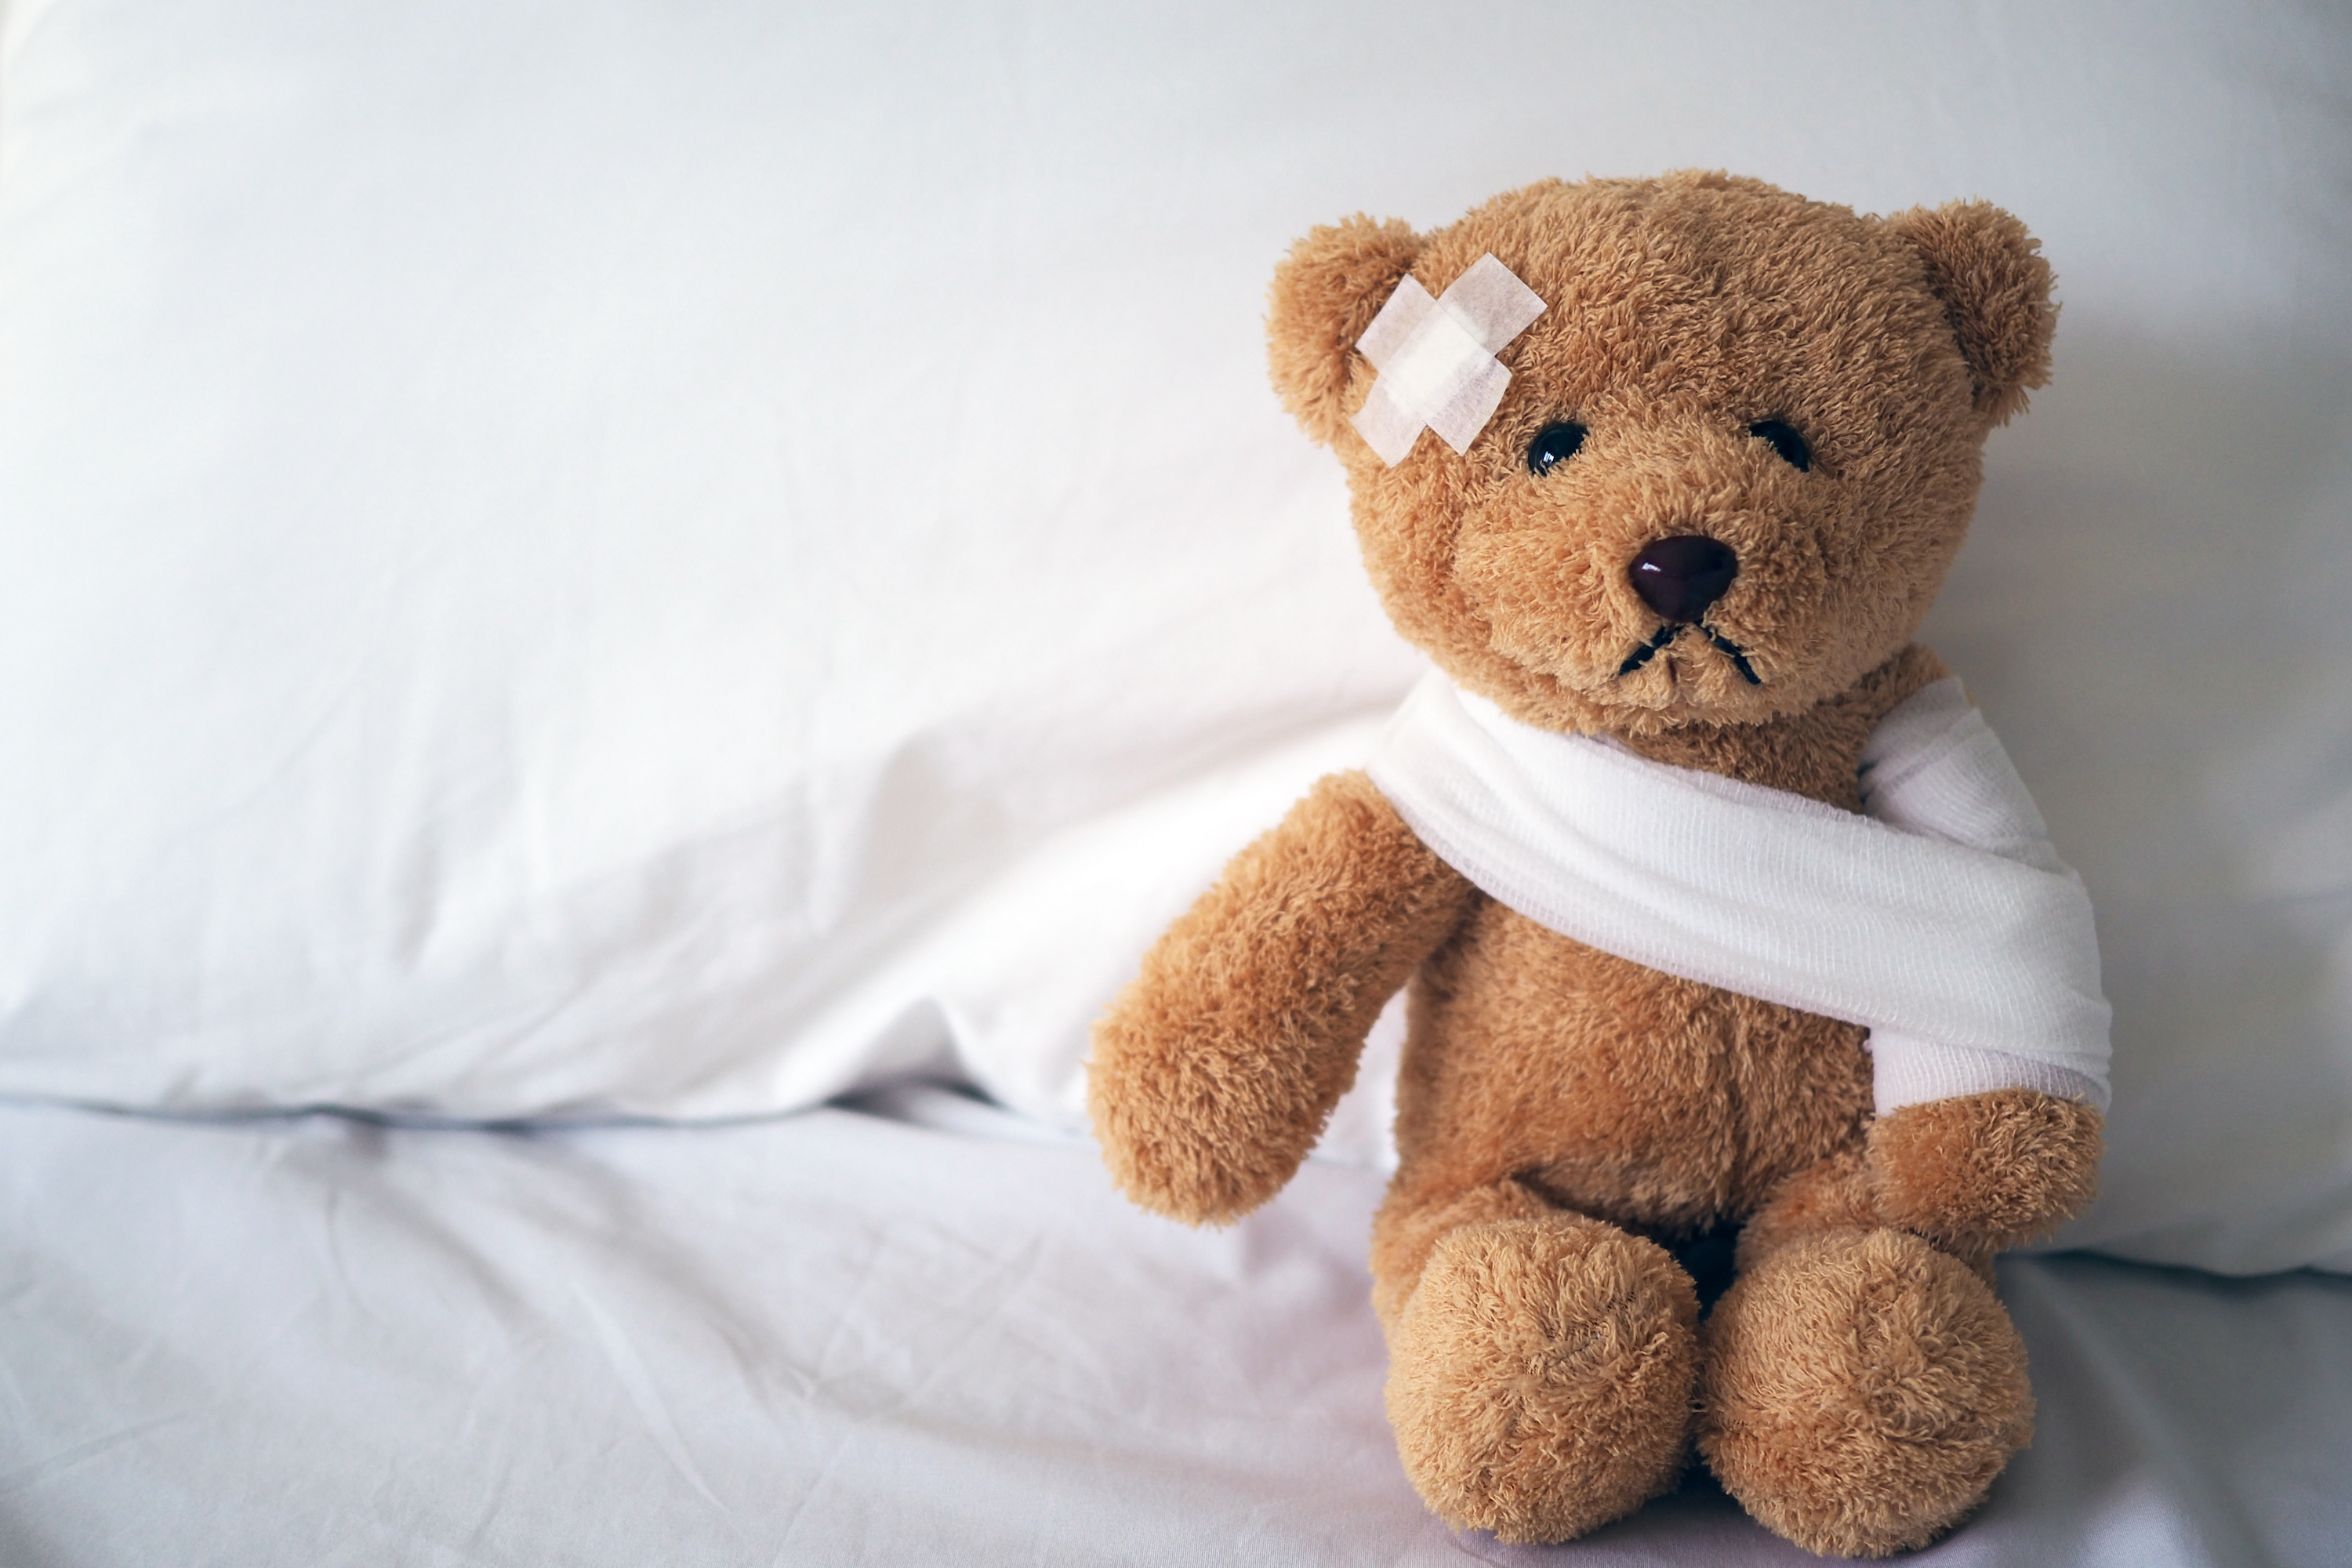 This photo shows a bandaged up and frowning teddy bear in a hospital bed